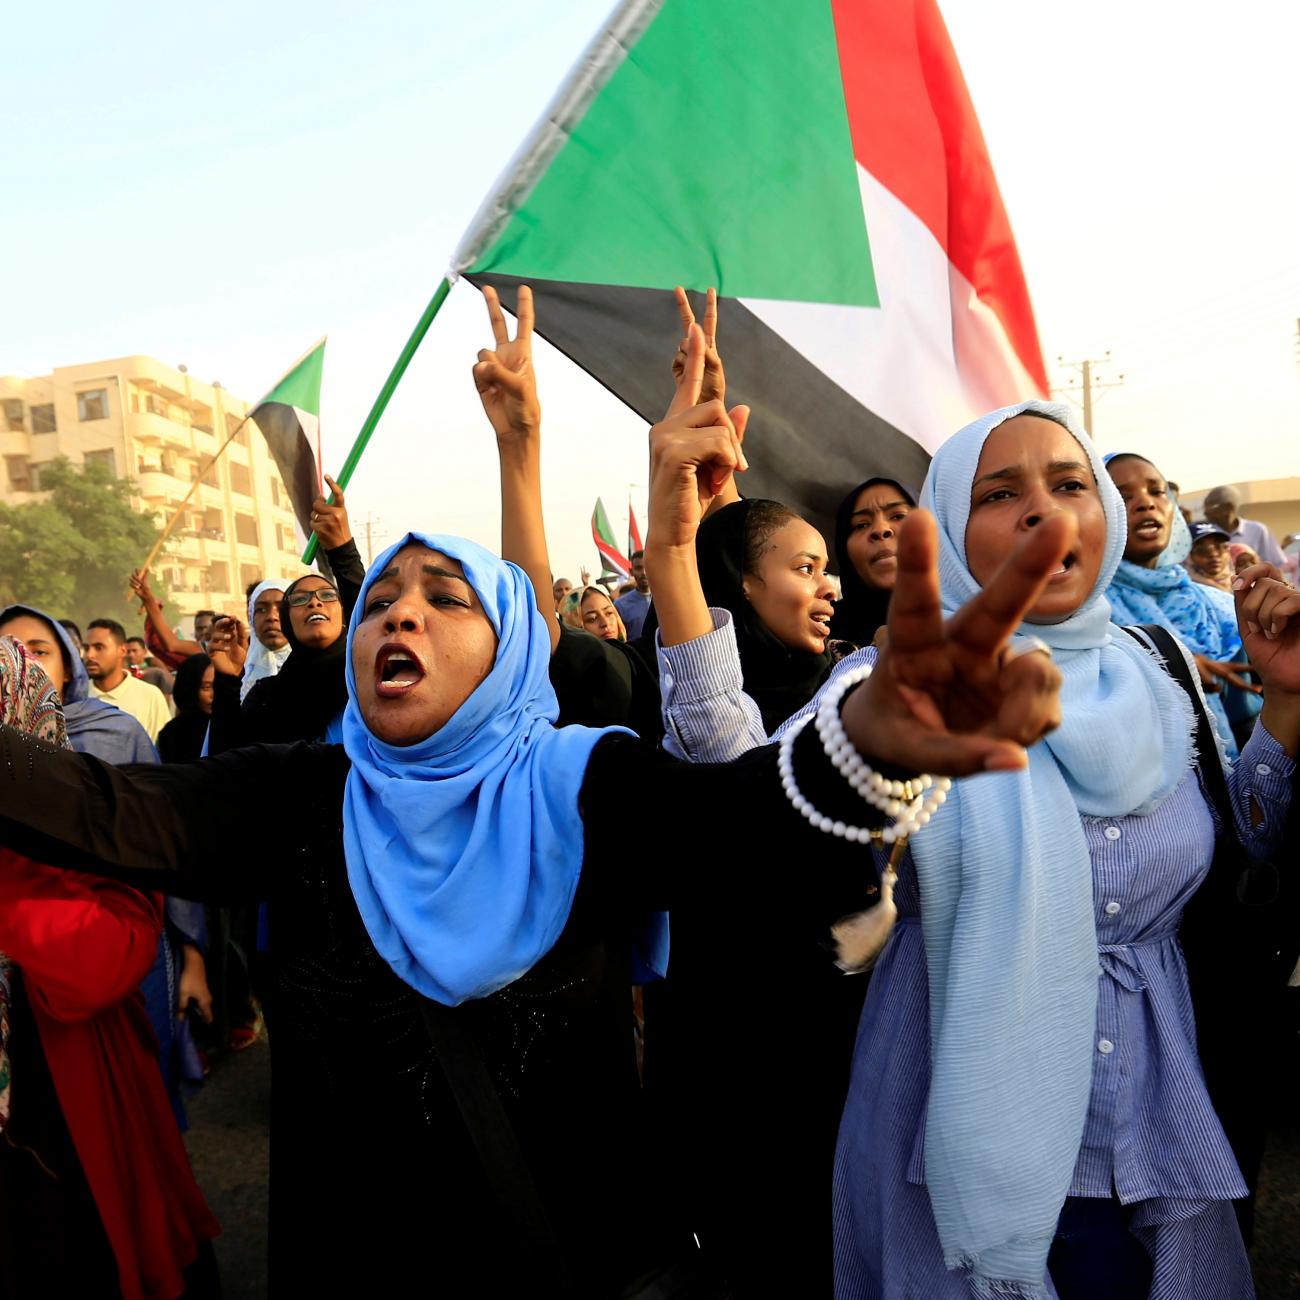 Protesters march during a demonstration to commemorate 40 days since the sit-in massacre in Khartoum, Sudan. Photo taken July 13, 2019.